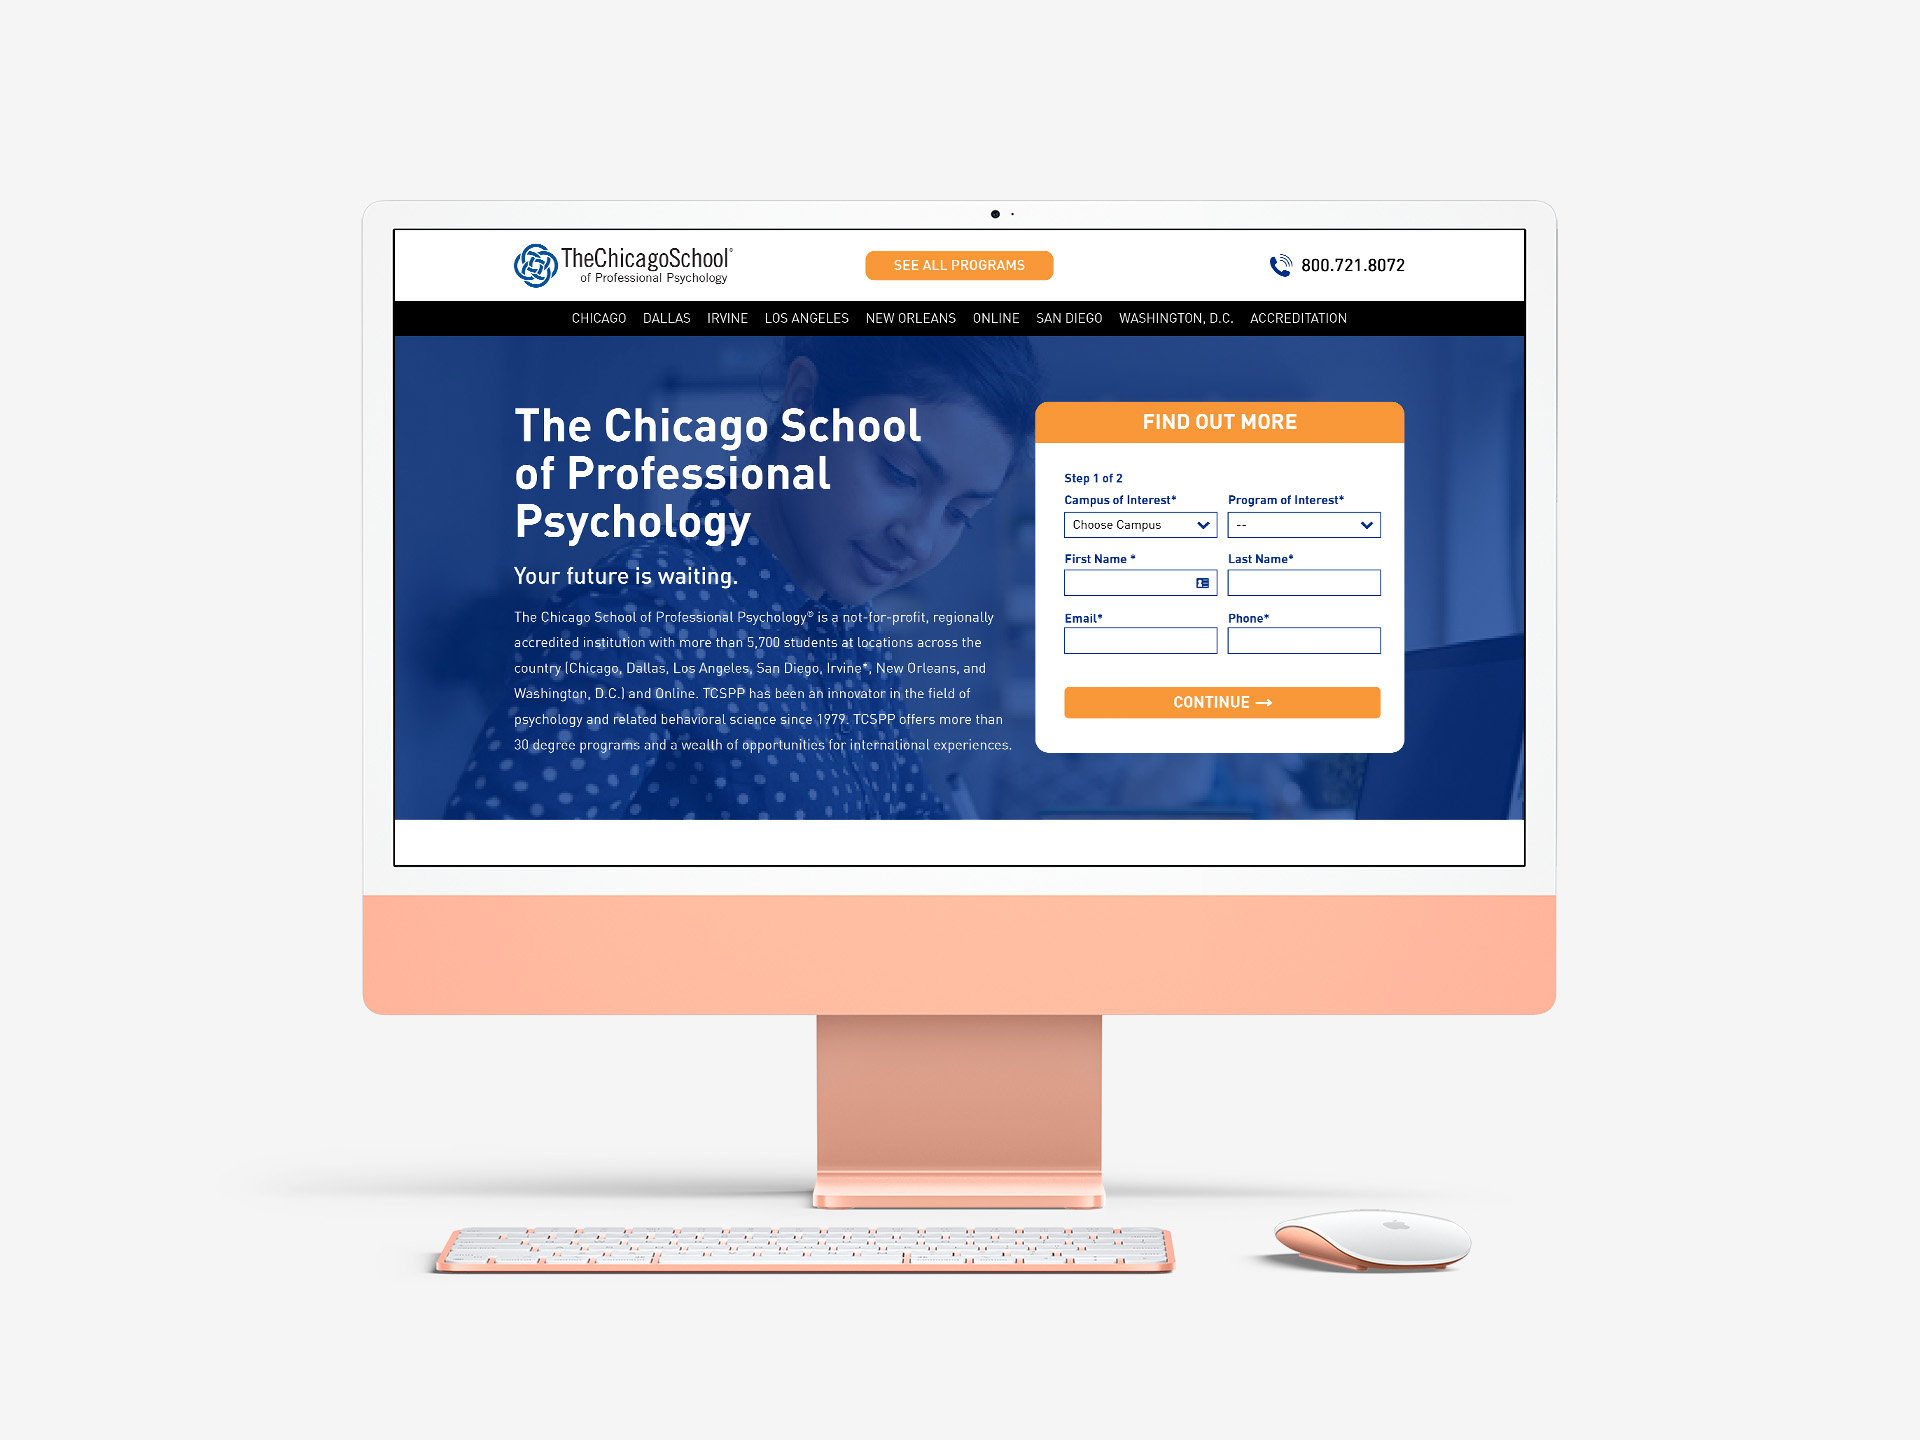 The Chicago School of Professional Psychology Paid Landing Page Mockup